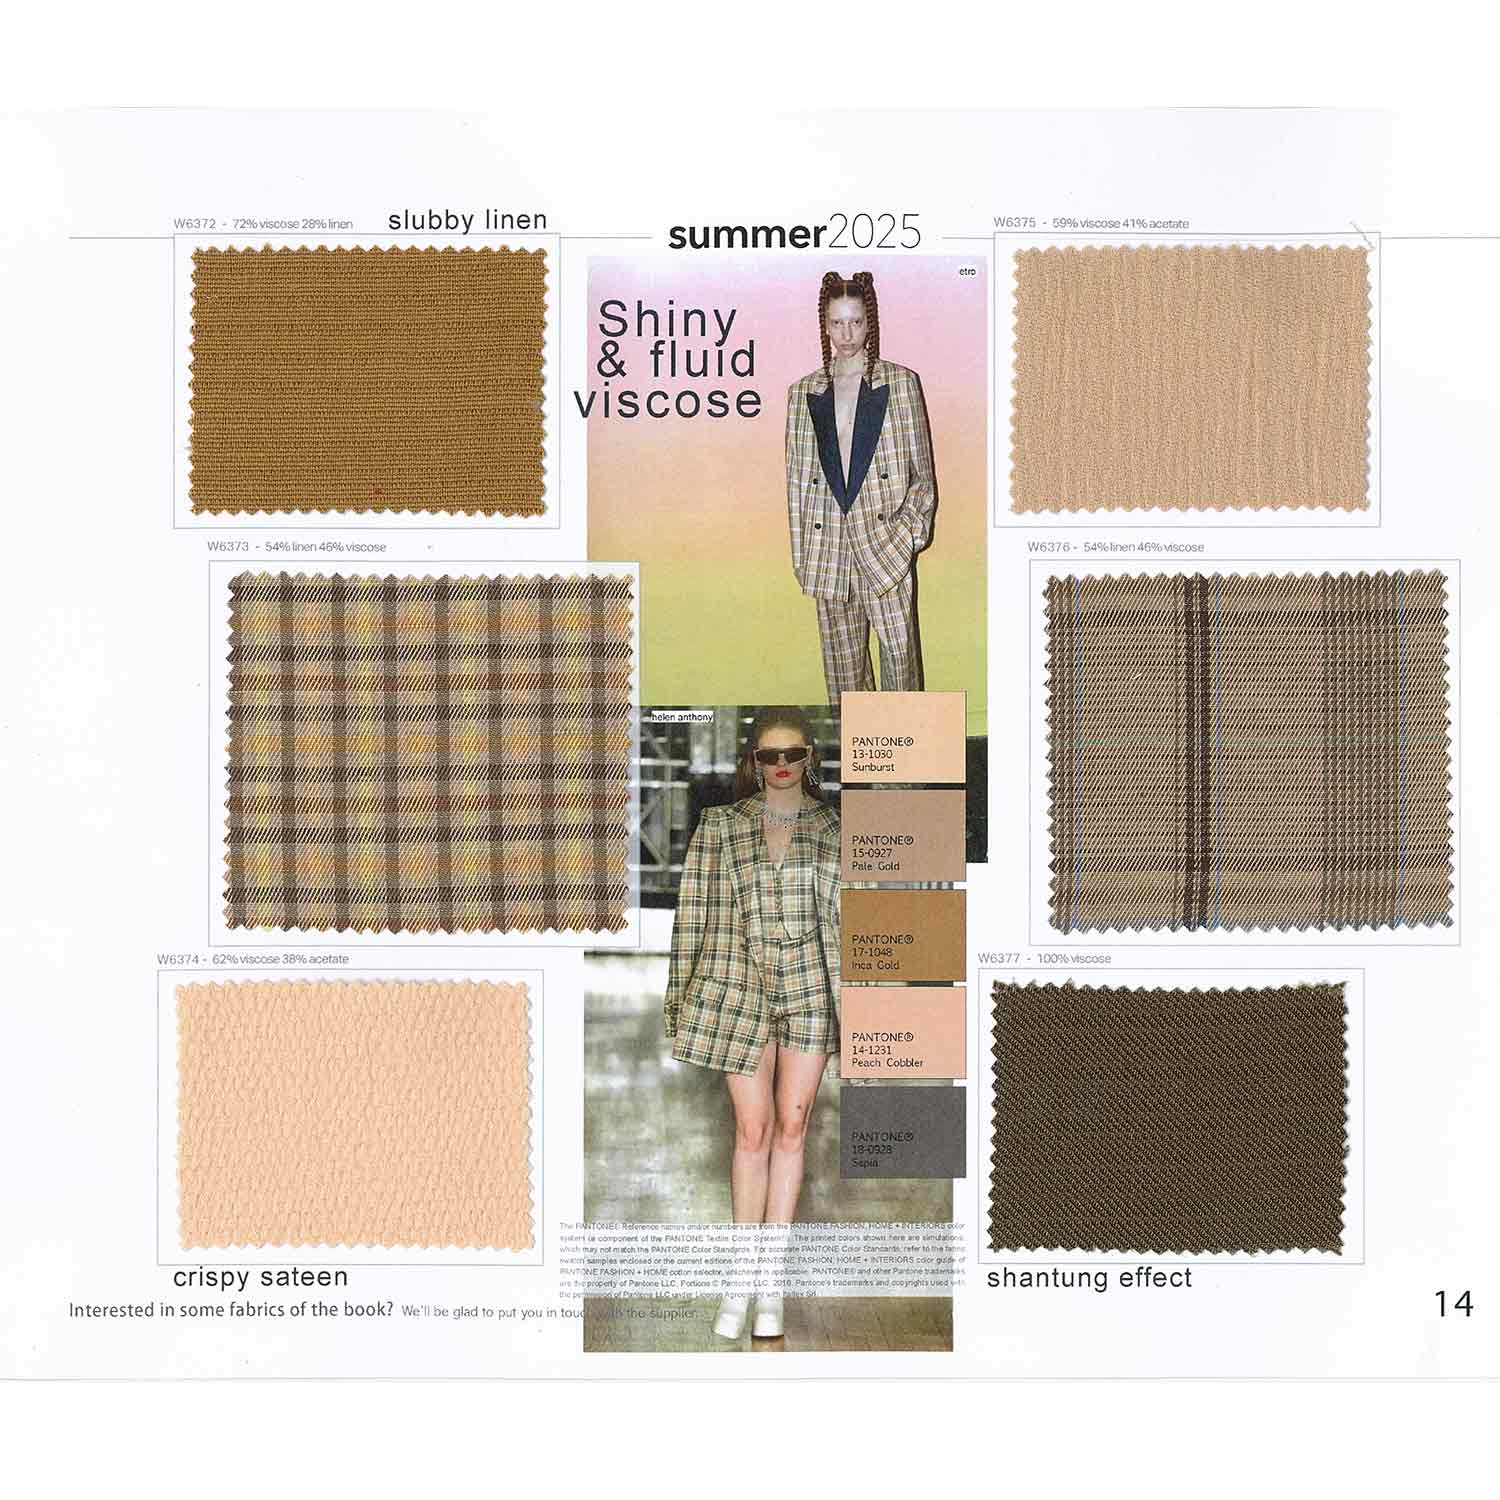 Shiny viscose with linen weft in the warm tones of refined checks for jackets. Viscose also in precious rippled satins. Silk and viscose for embossed jacquards on checkered patterns. Viscose and acetate in nude colour crispy sateen for tops, skirts and dresses. One shantung effect brown fabric.